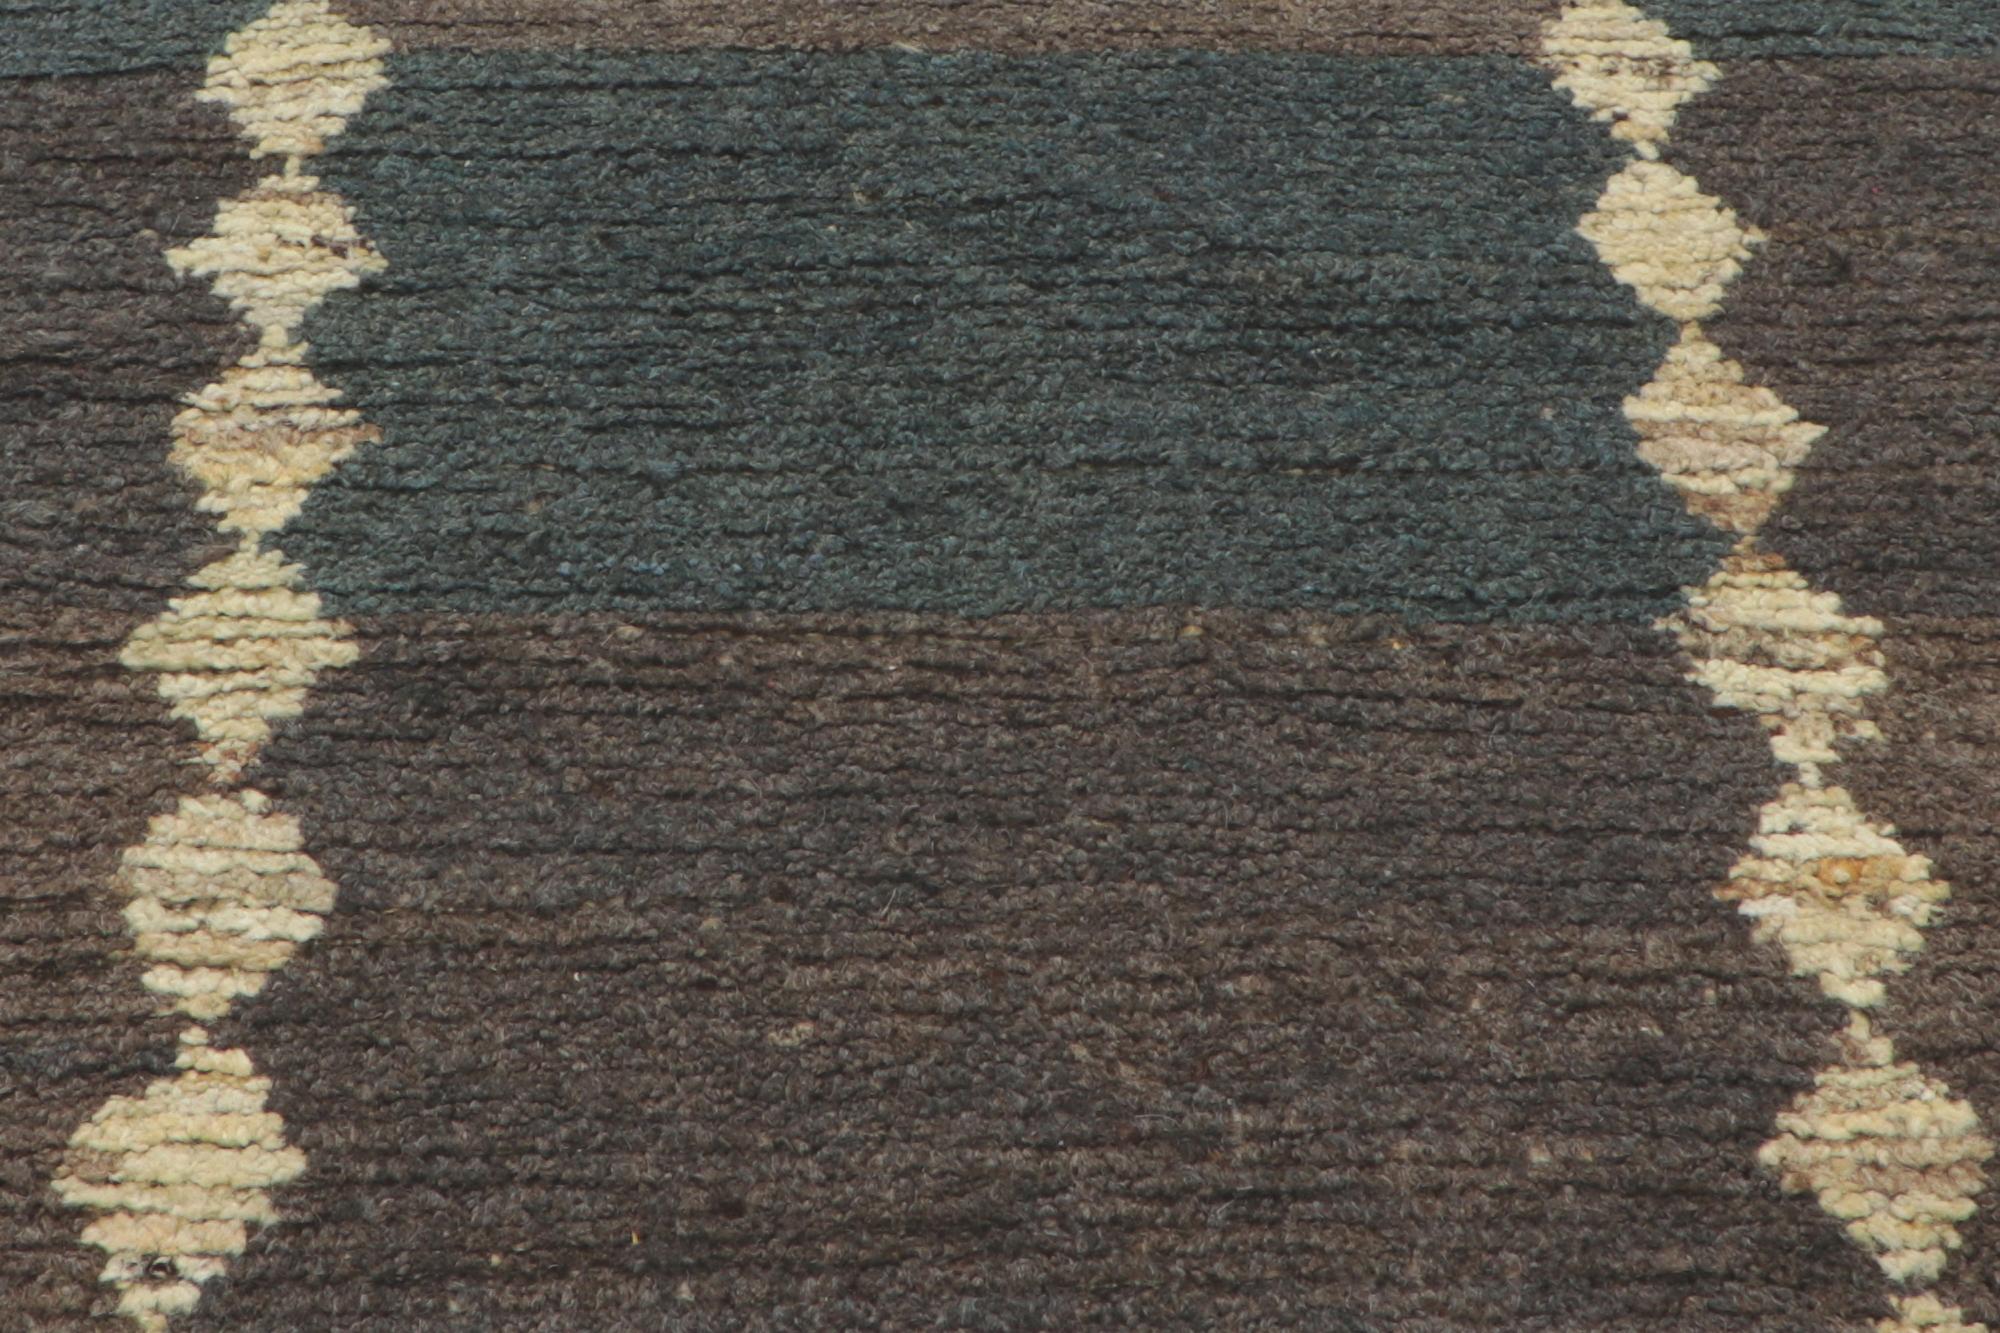 Earth-tone Checkered Moroccan Rug, Masculine Appeal Meets Midcentury Modern In New Condition For Sale In Dallas, TX